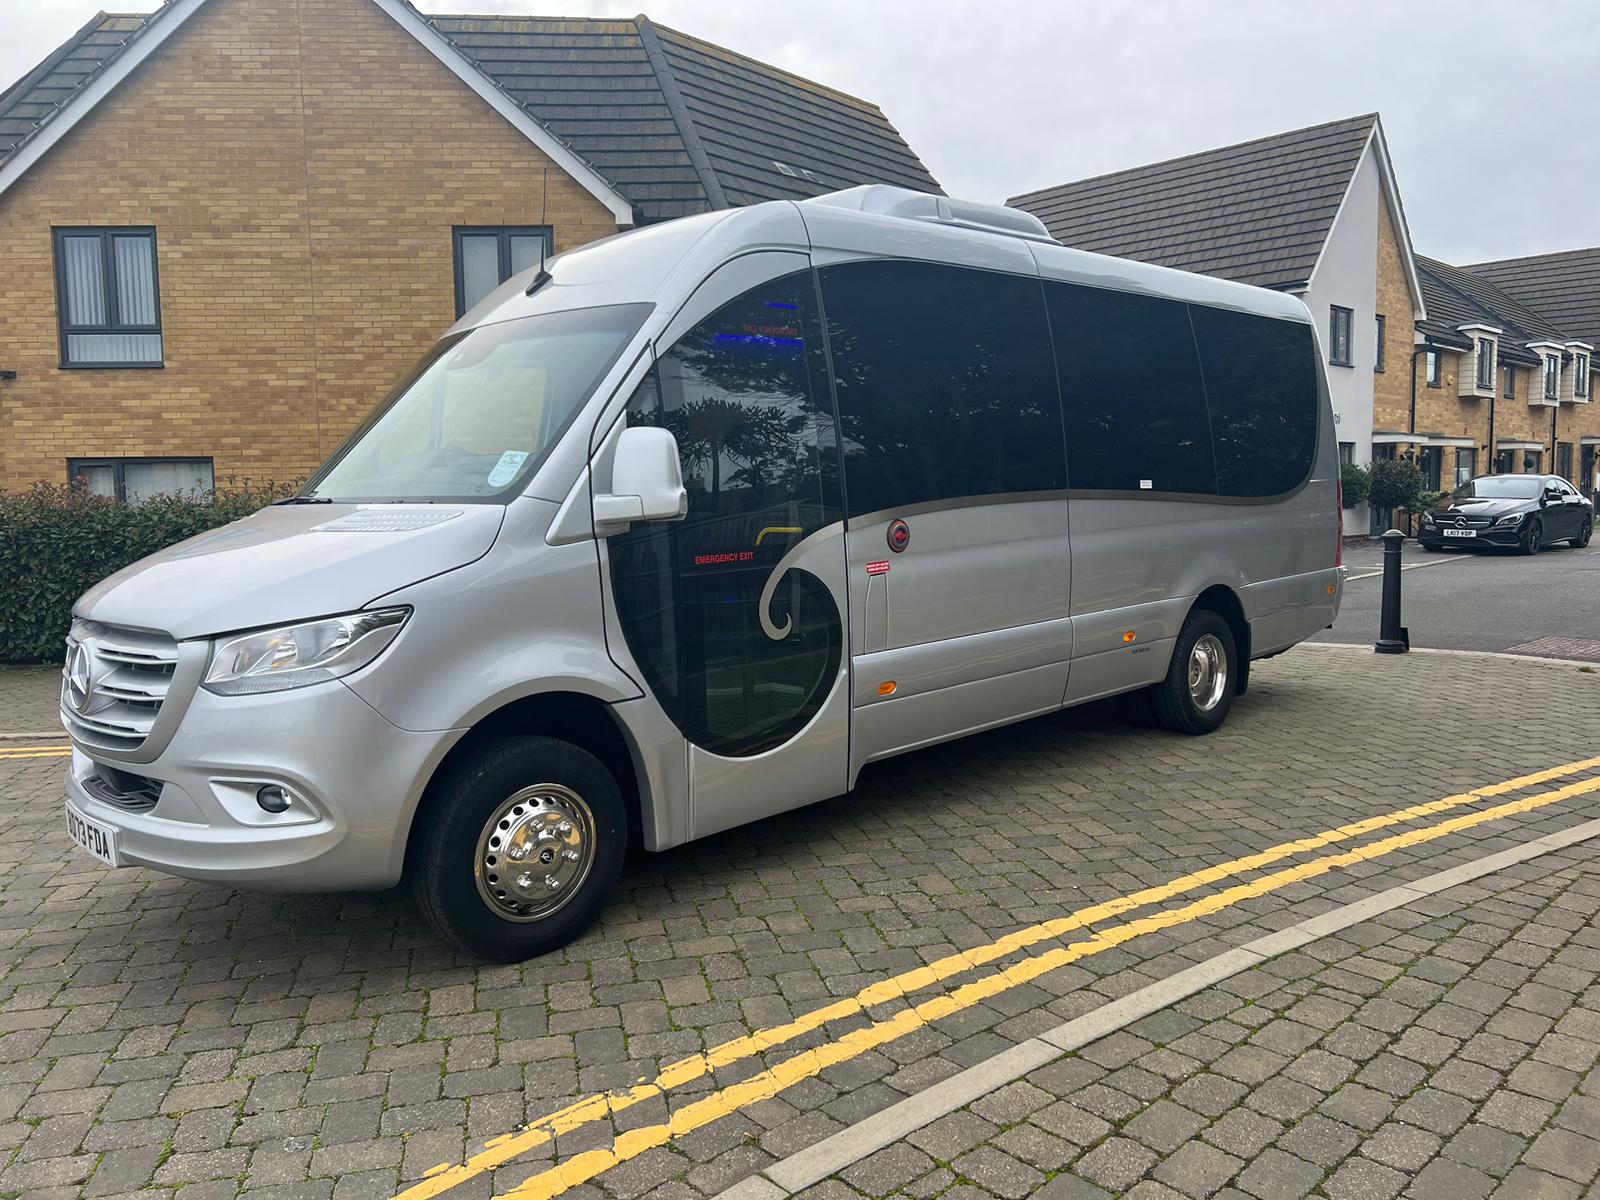 Minibus Hire Tips: What You Need to Know Before Booking in the UK